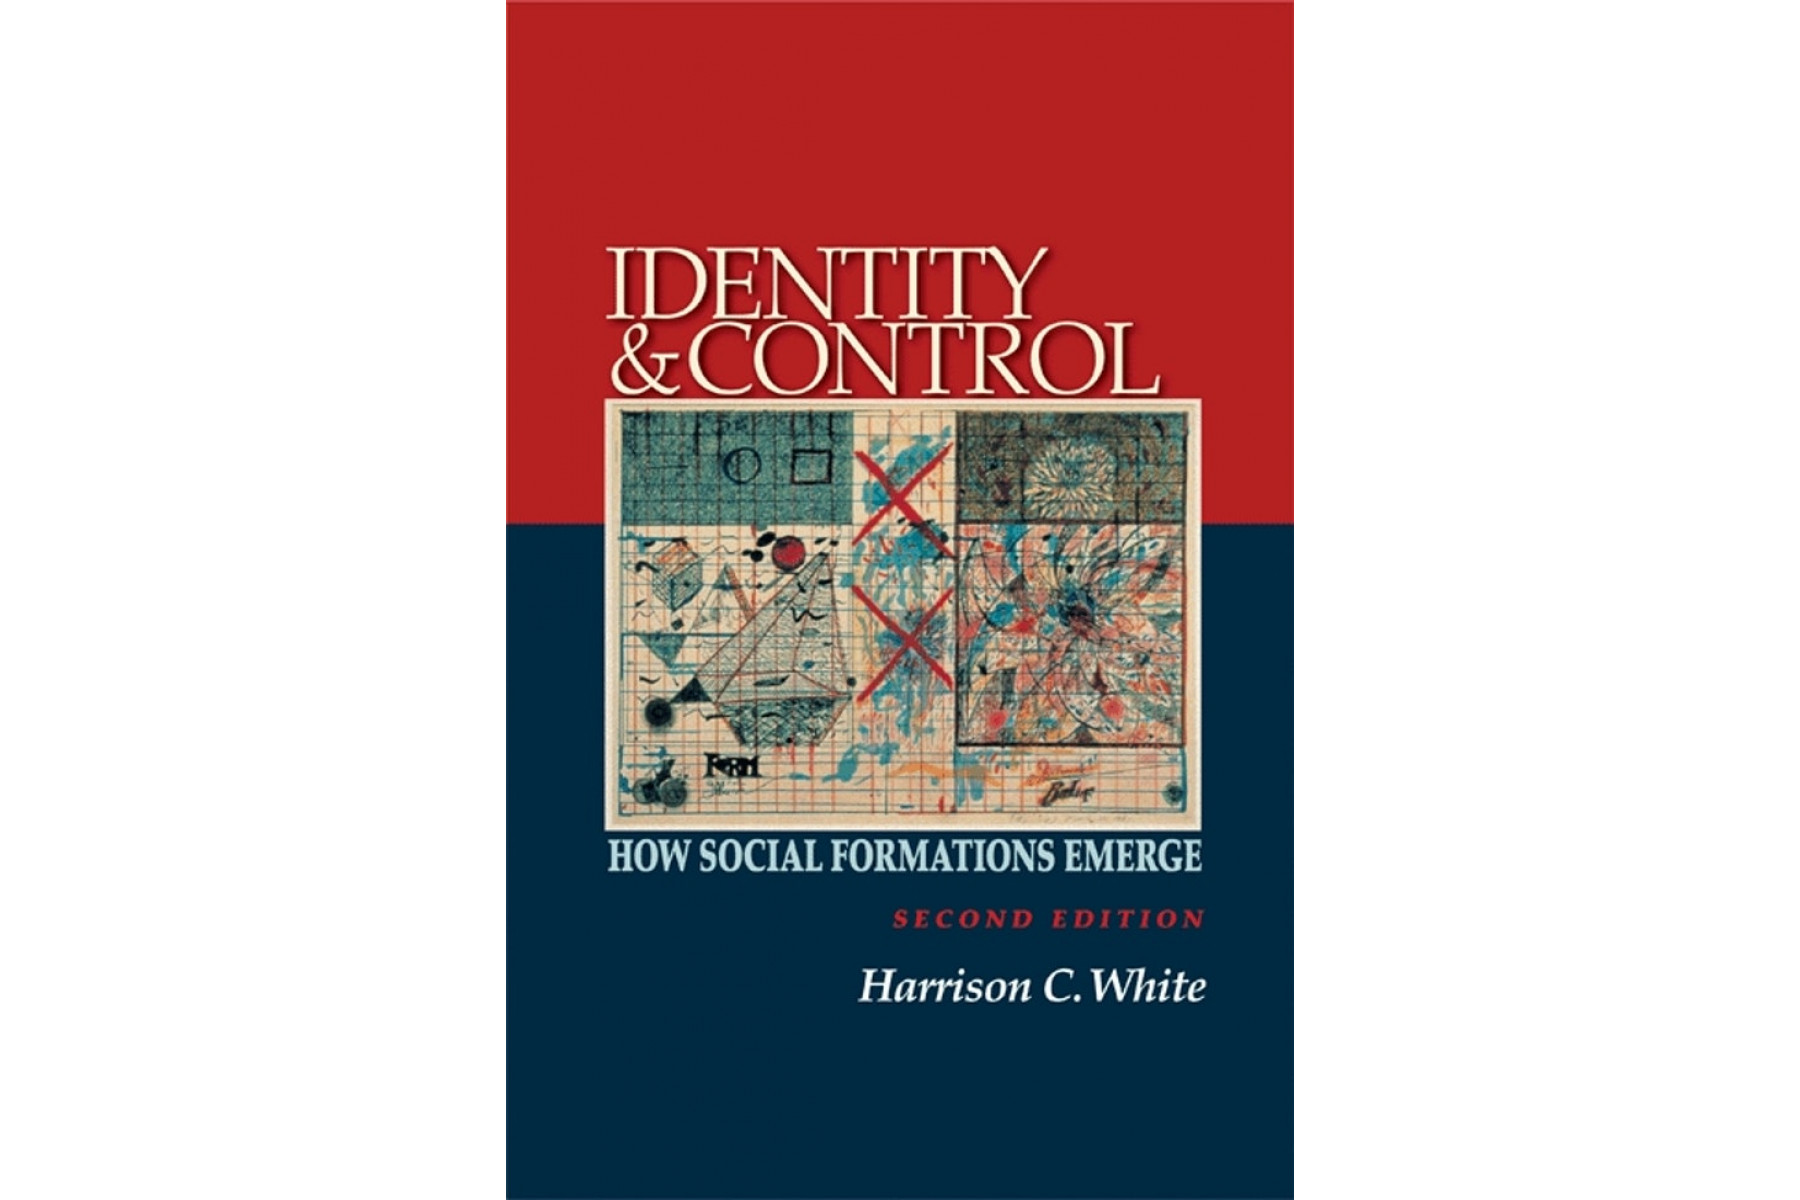 Identity and Control: How Social Formations Emerge, Second Edition